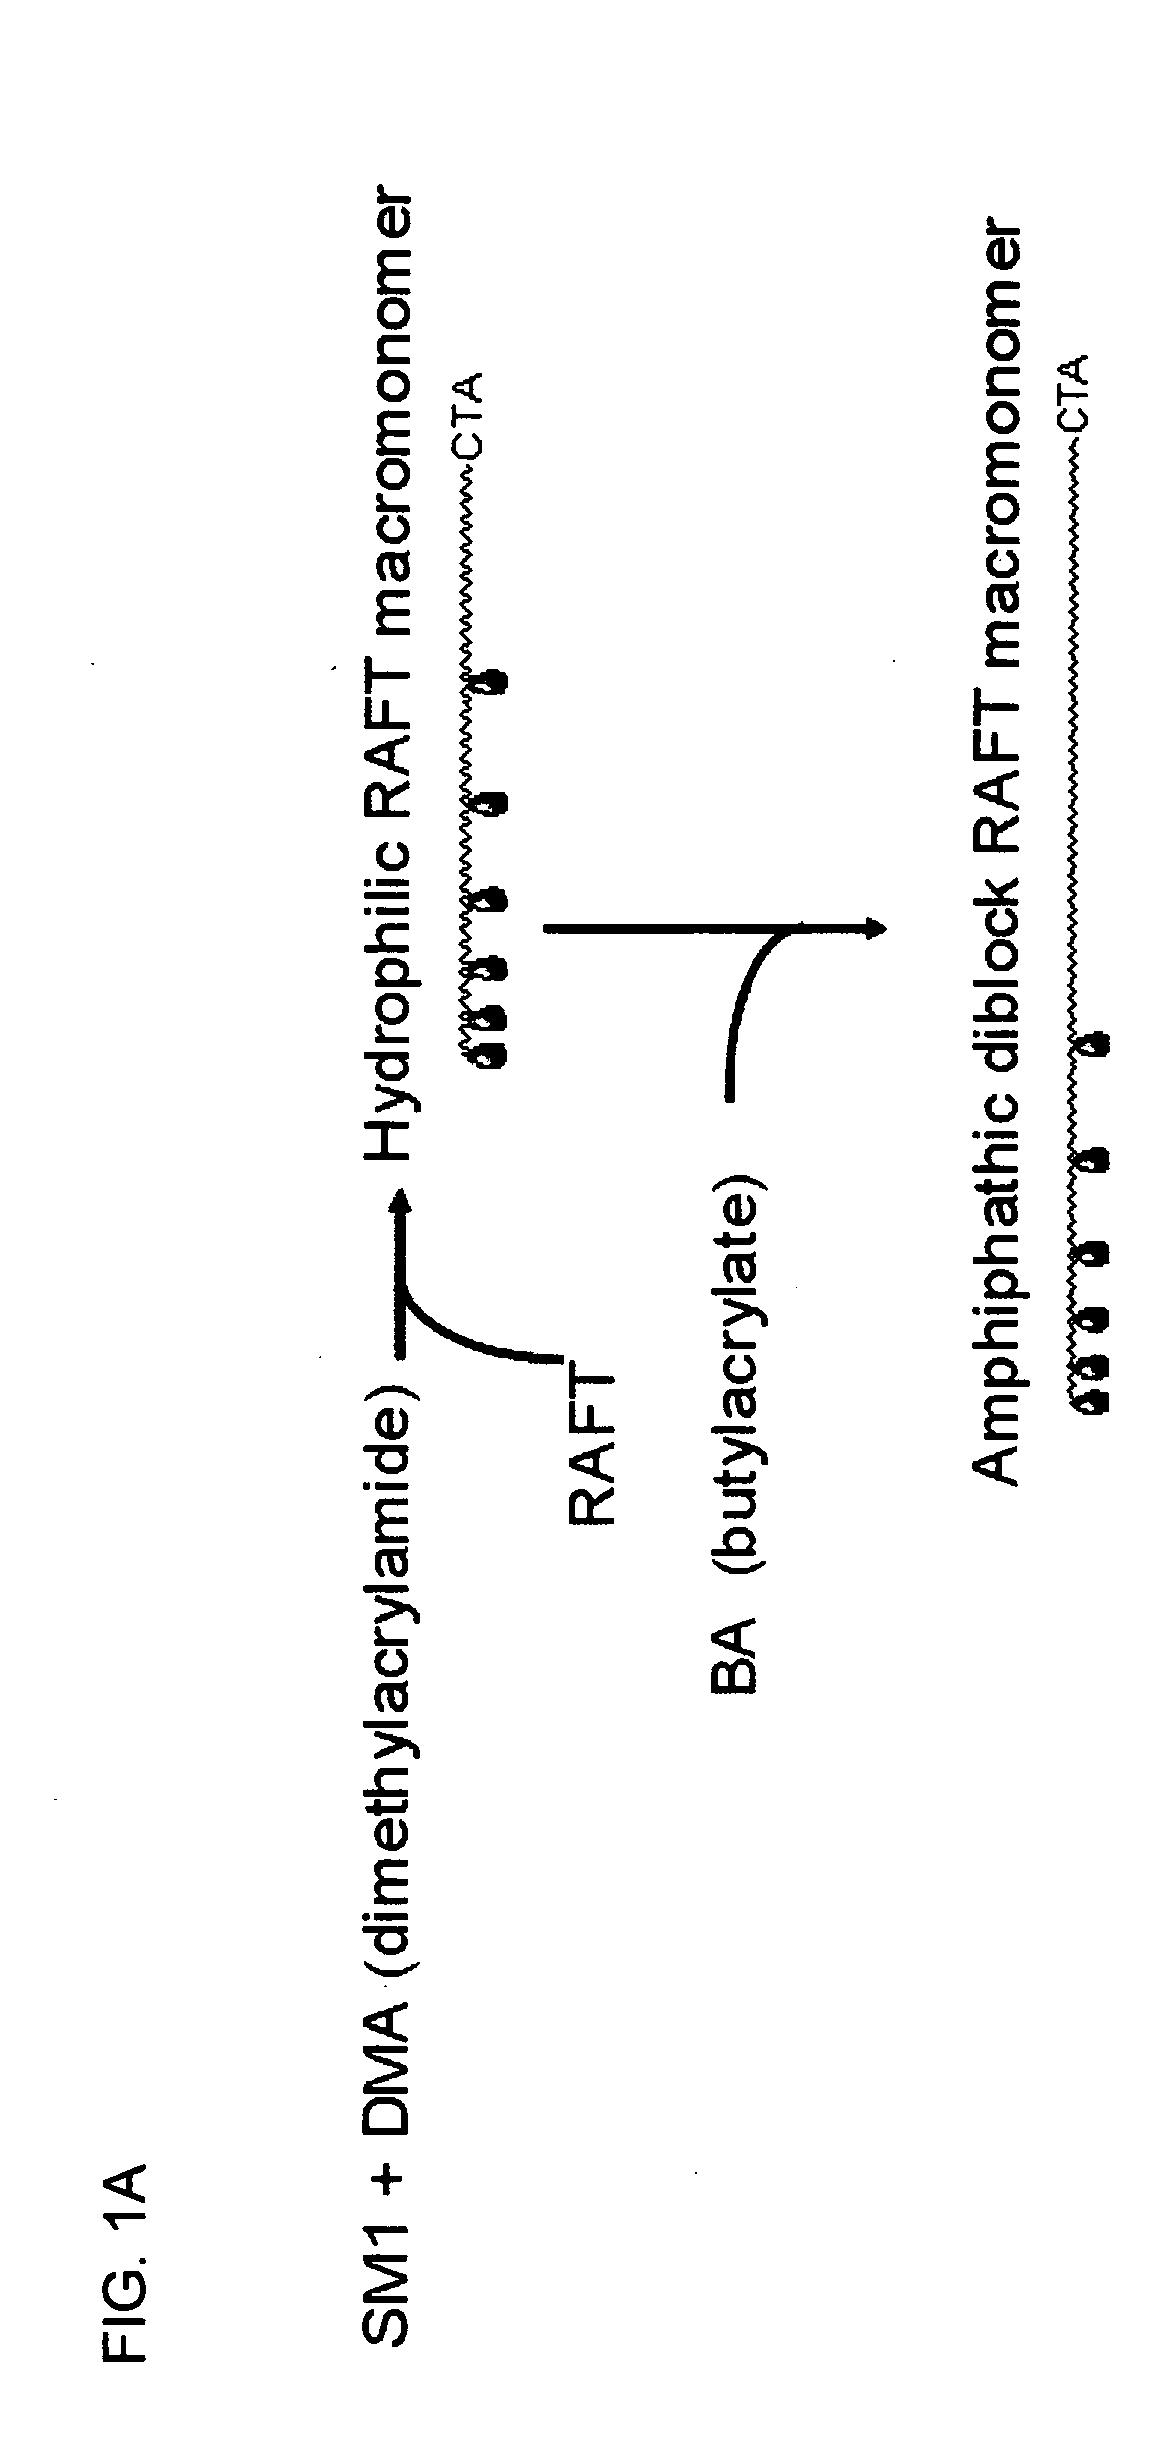 Toxin binding compositions